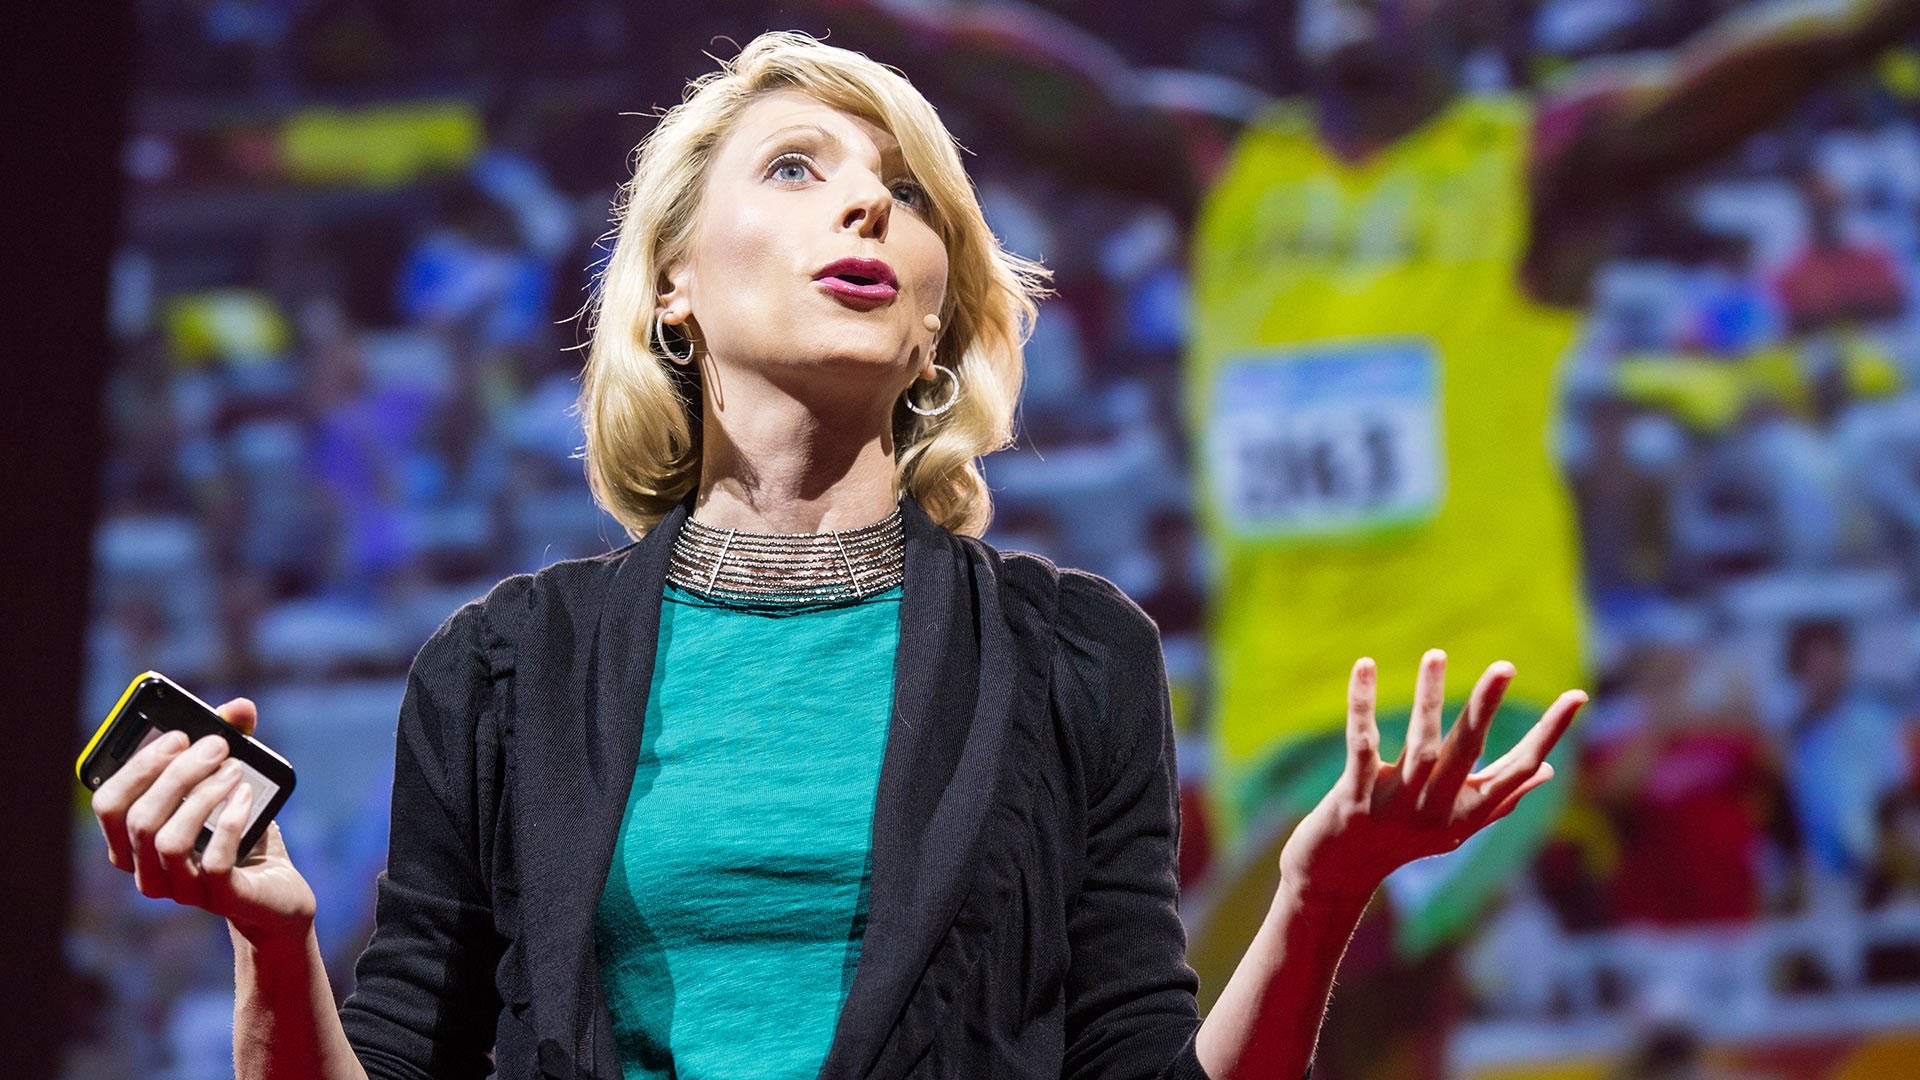 Your body language shapes who you are – Amy Cuddy